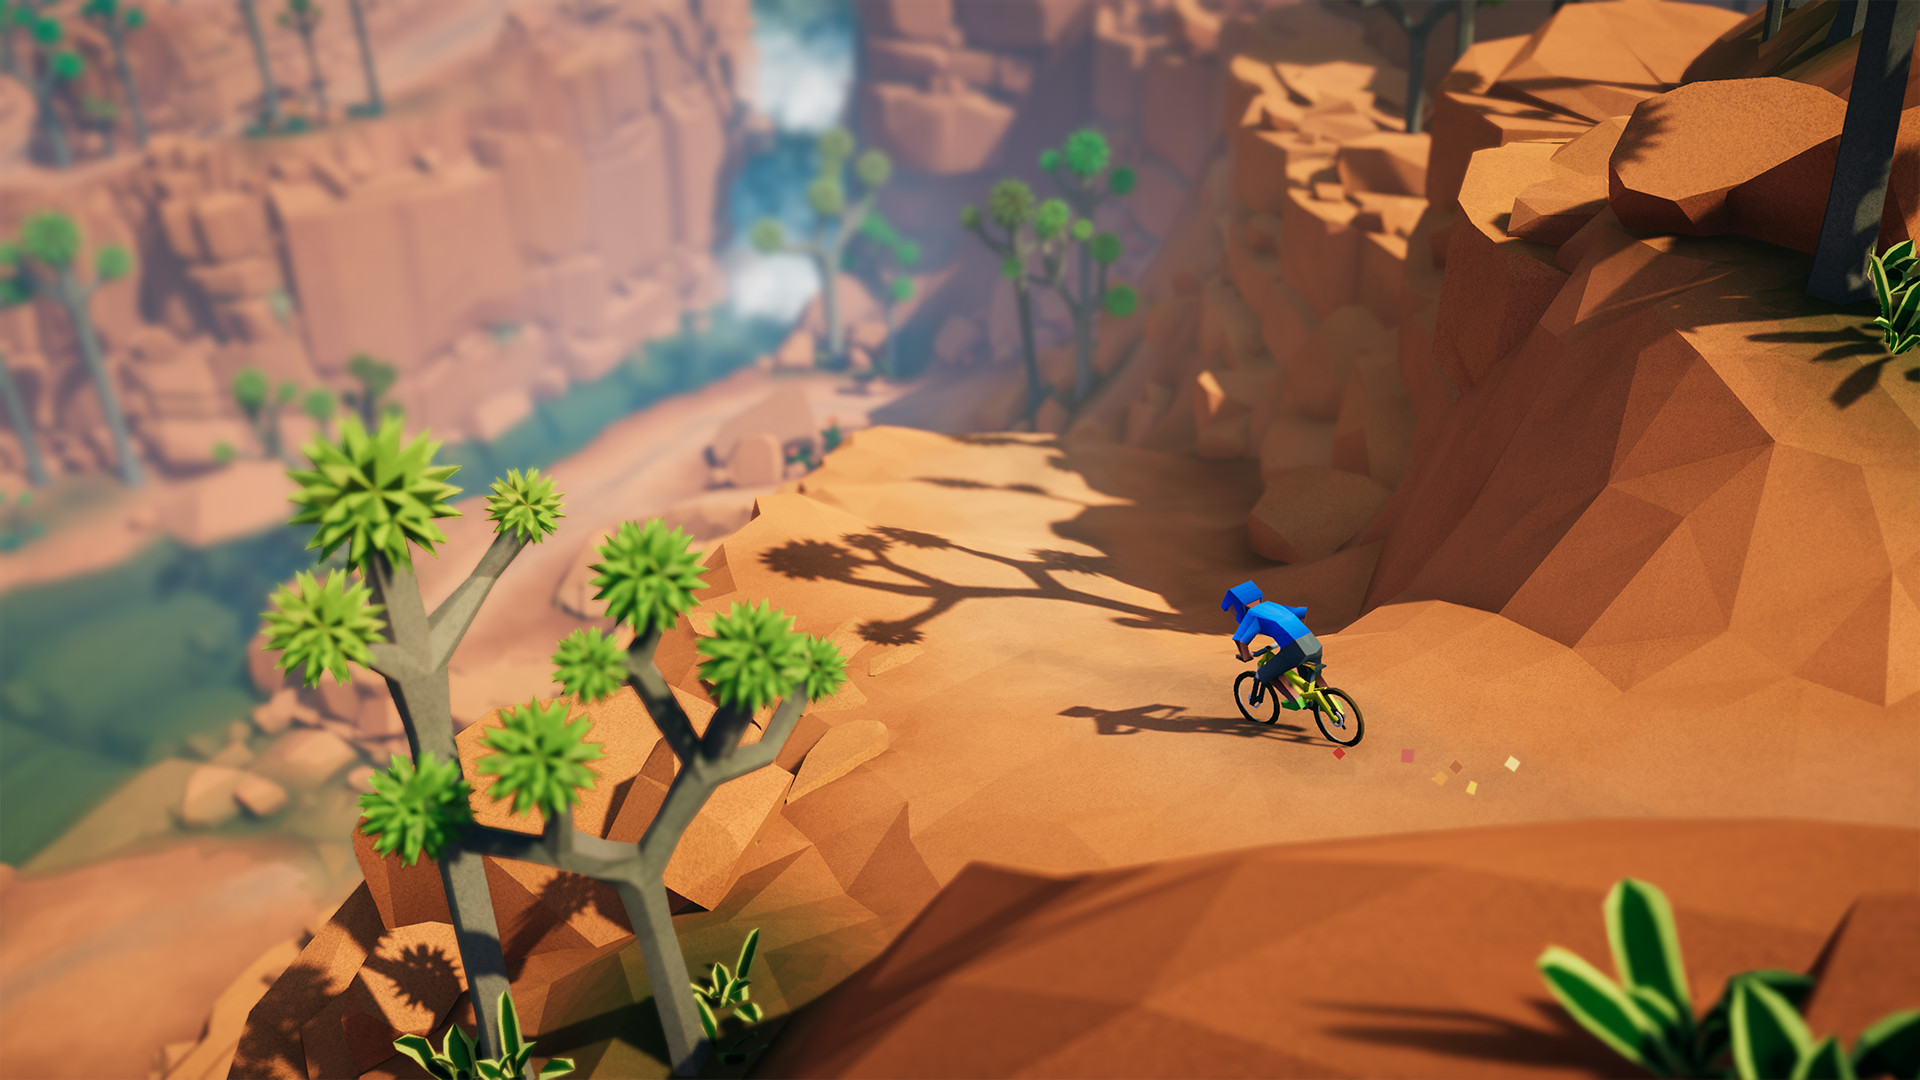 Lonely mountains: downhill 1 0 – action mountain biking game play